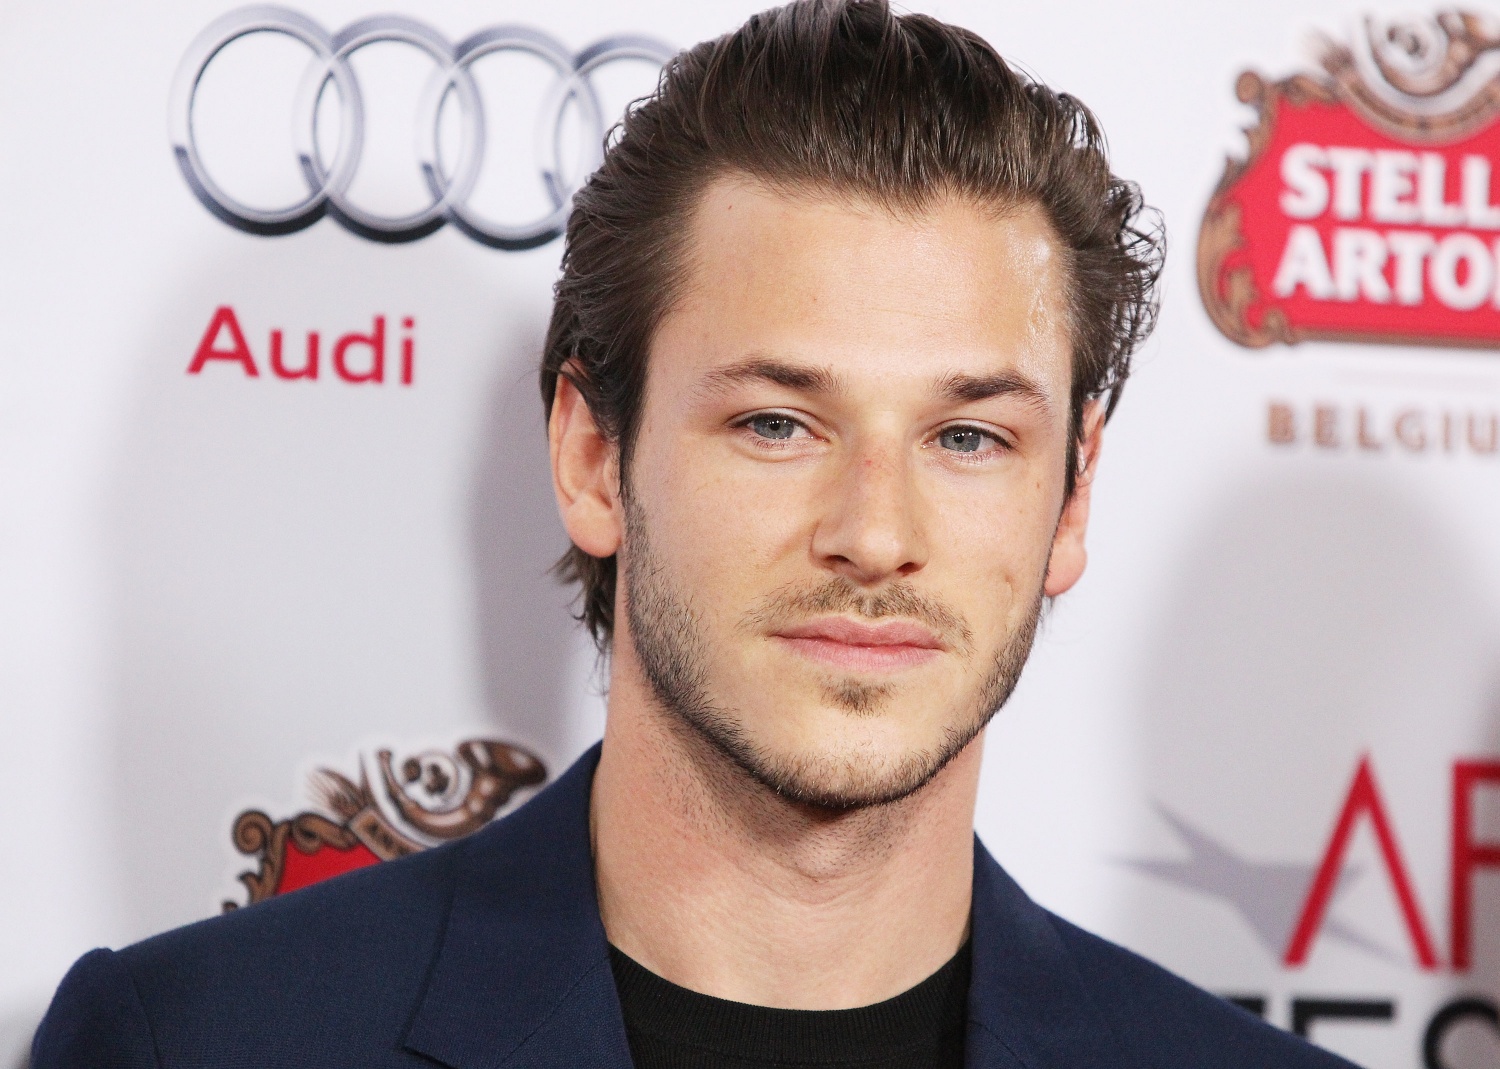 Gaspard Ulliel arrives at AFI FEST 2014 Presented By Audi - "Saint Laurent" special screening held at Dolby Theatre on November 11, 2014 in Hollywood, California. (Photo by Michael Tran/FilmMagic)